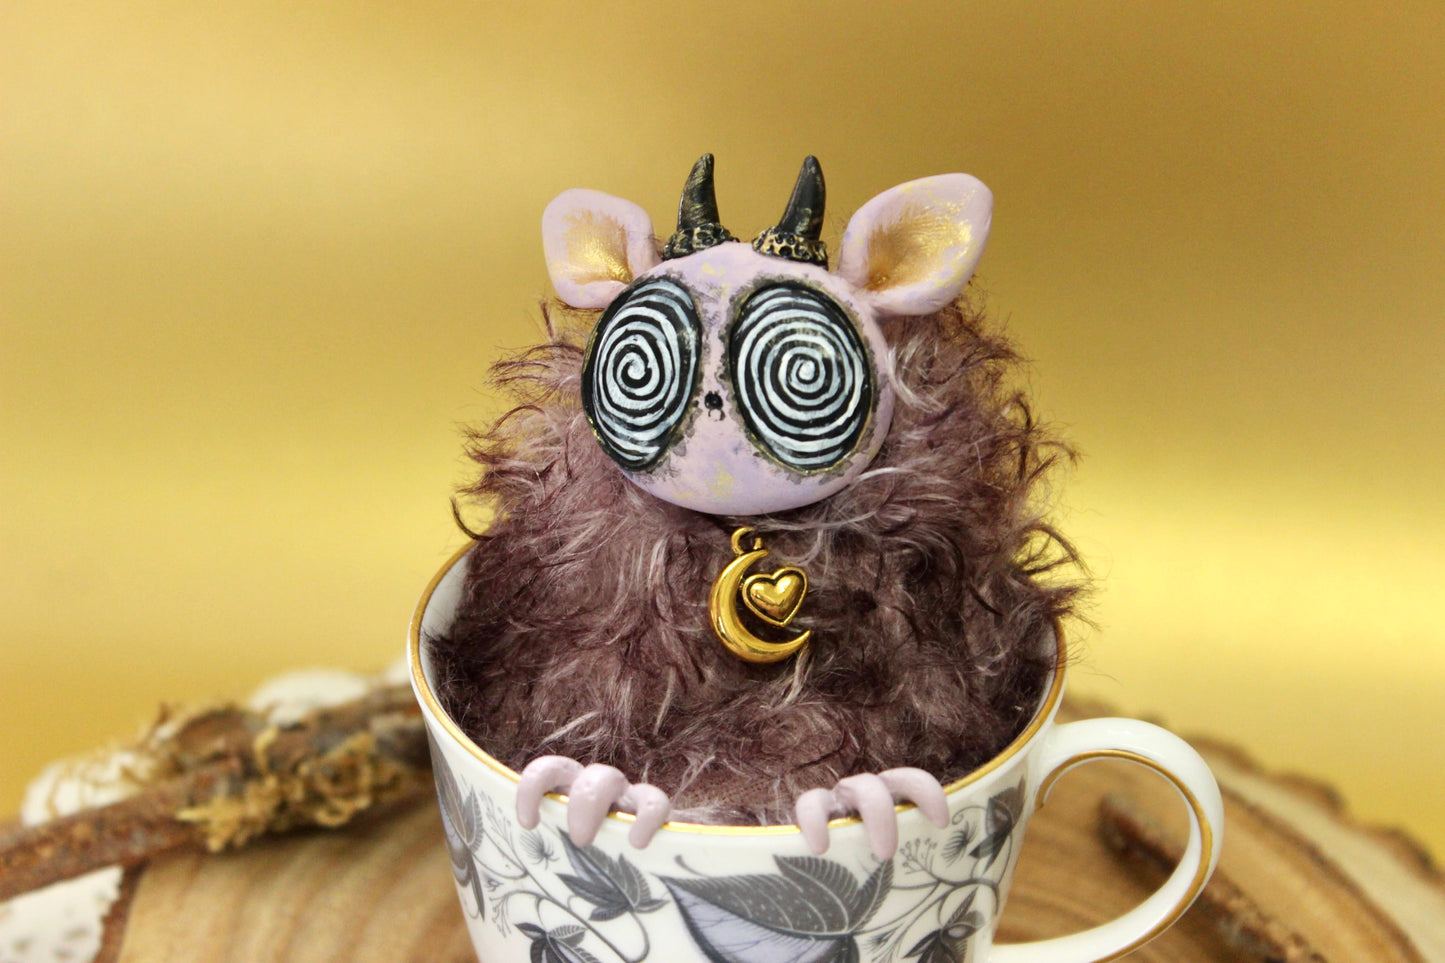 Cosmos the Teacup Critter